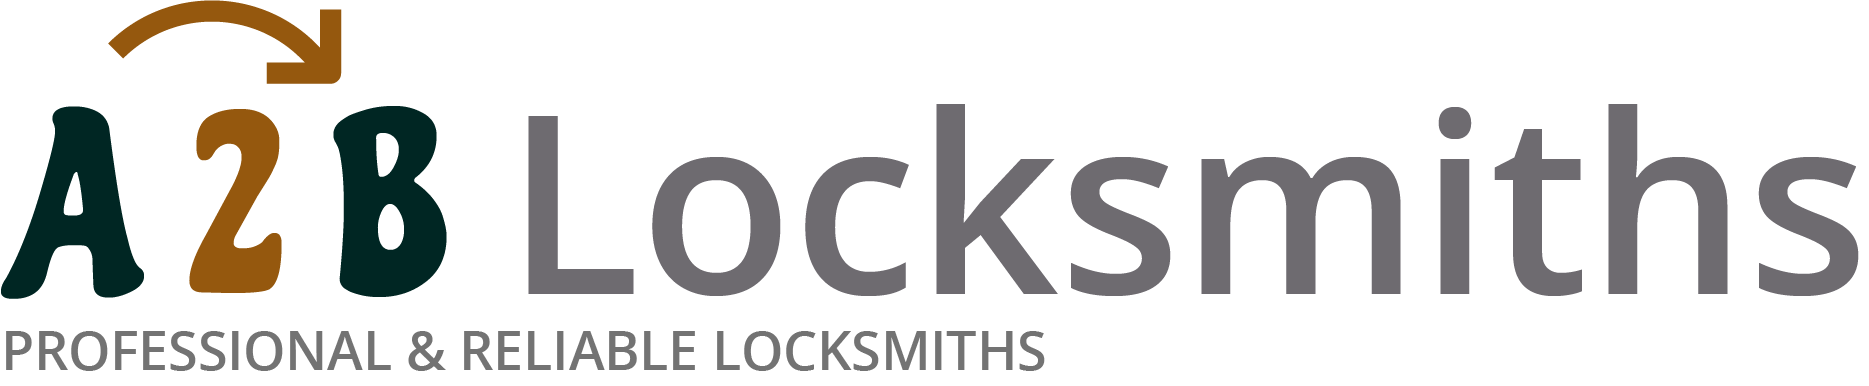 If you are locked out of house in Broadstairs, our 24/7 local emergency locksmith services can help you.